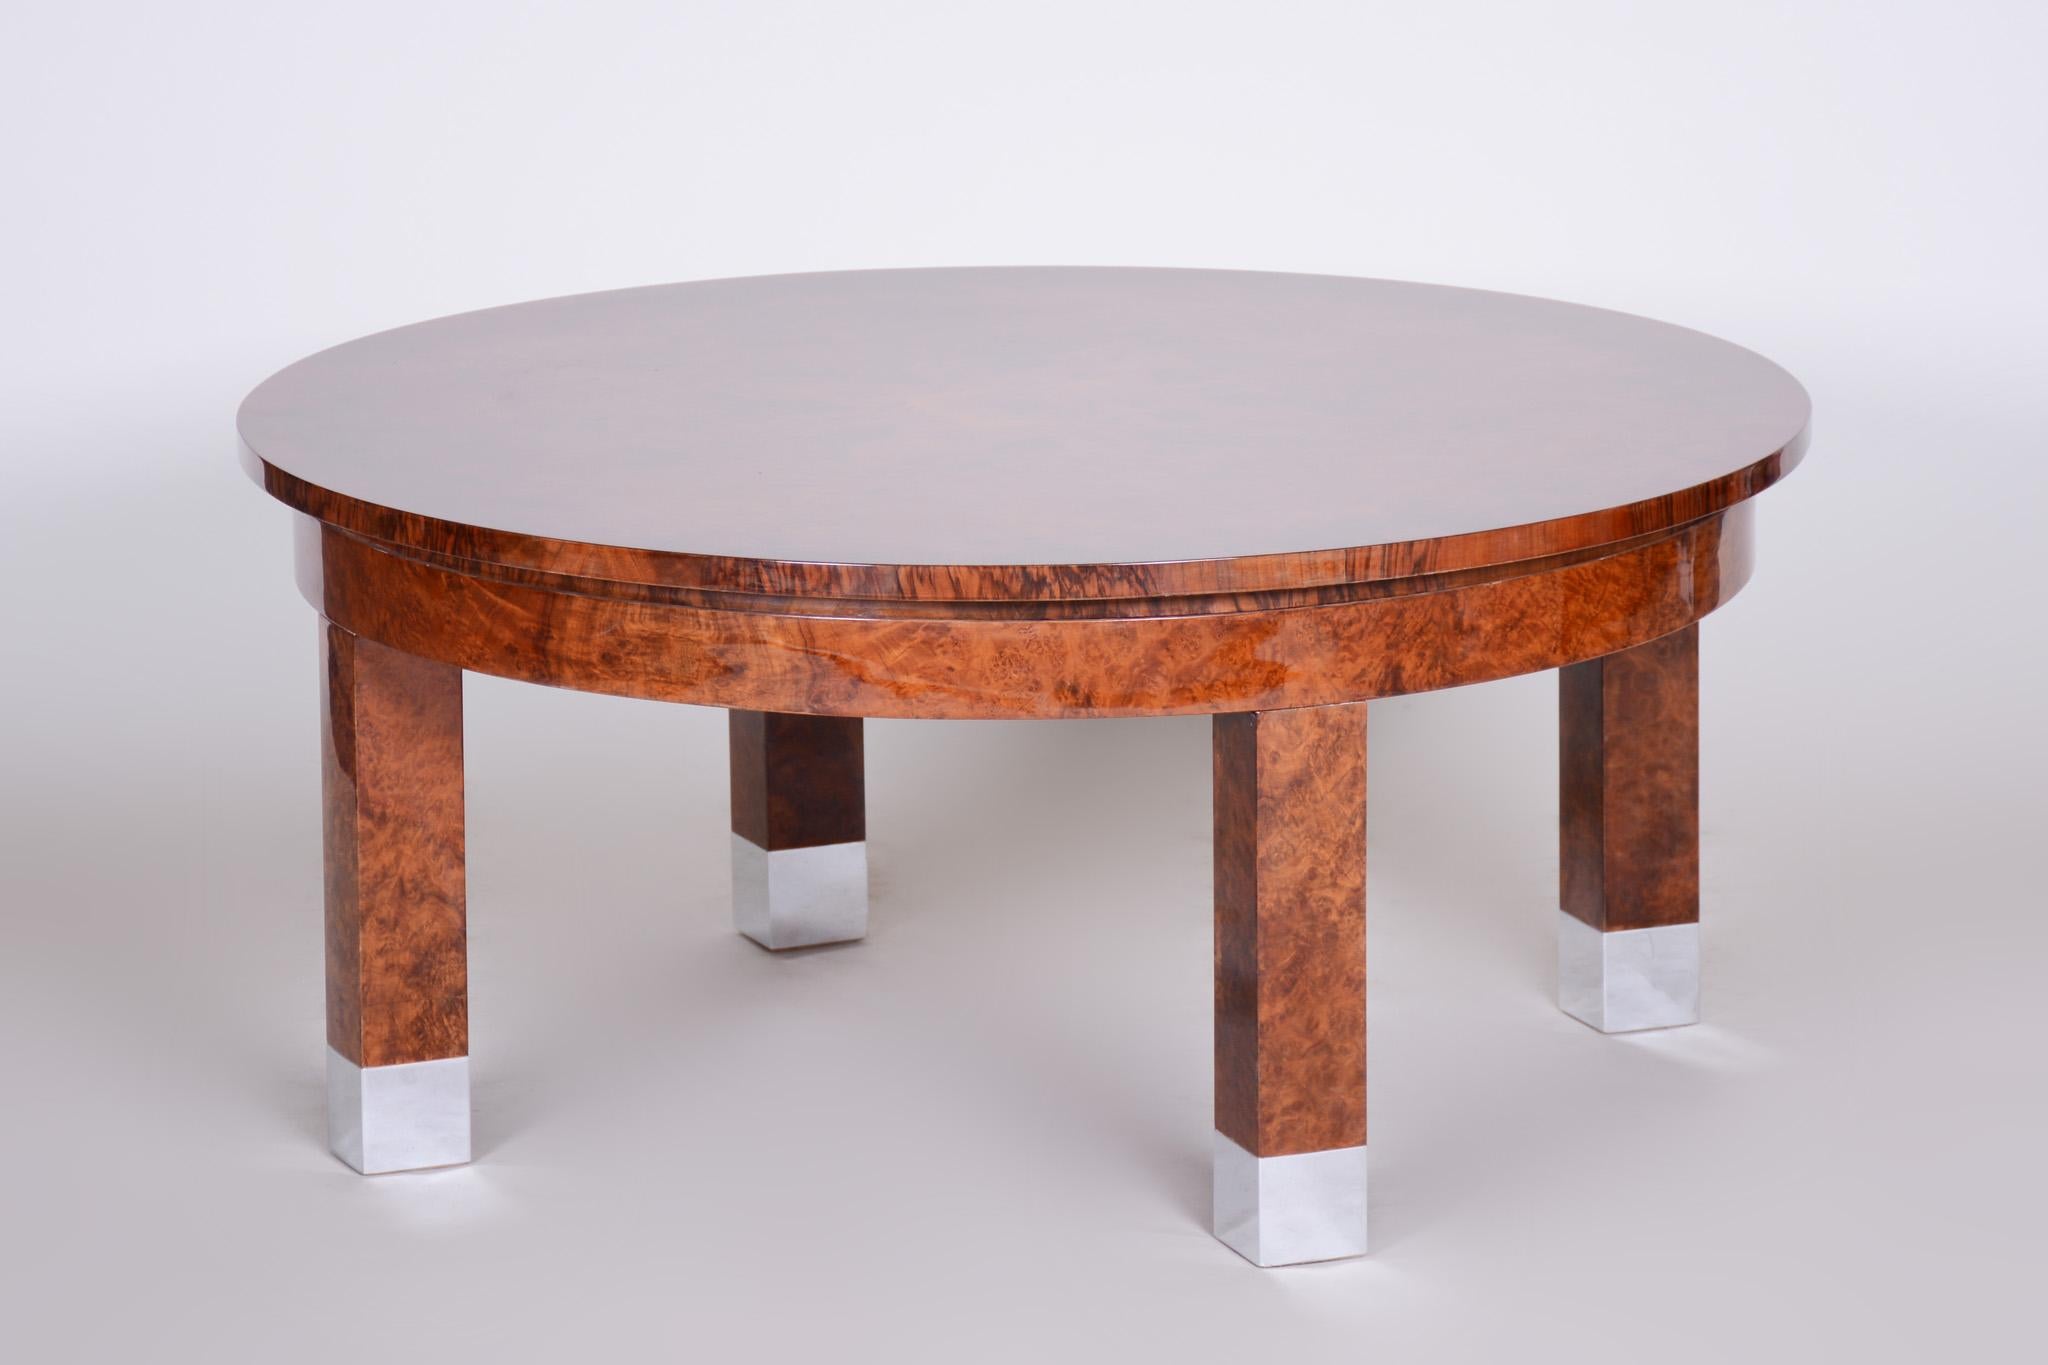 Unique Art Deco coffee table from Czechoslovakia with Big desk - diameter 110 cm (43.3 in)
Completely restored to high gloss.
Material: Walnut
Period: 1920-1929.